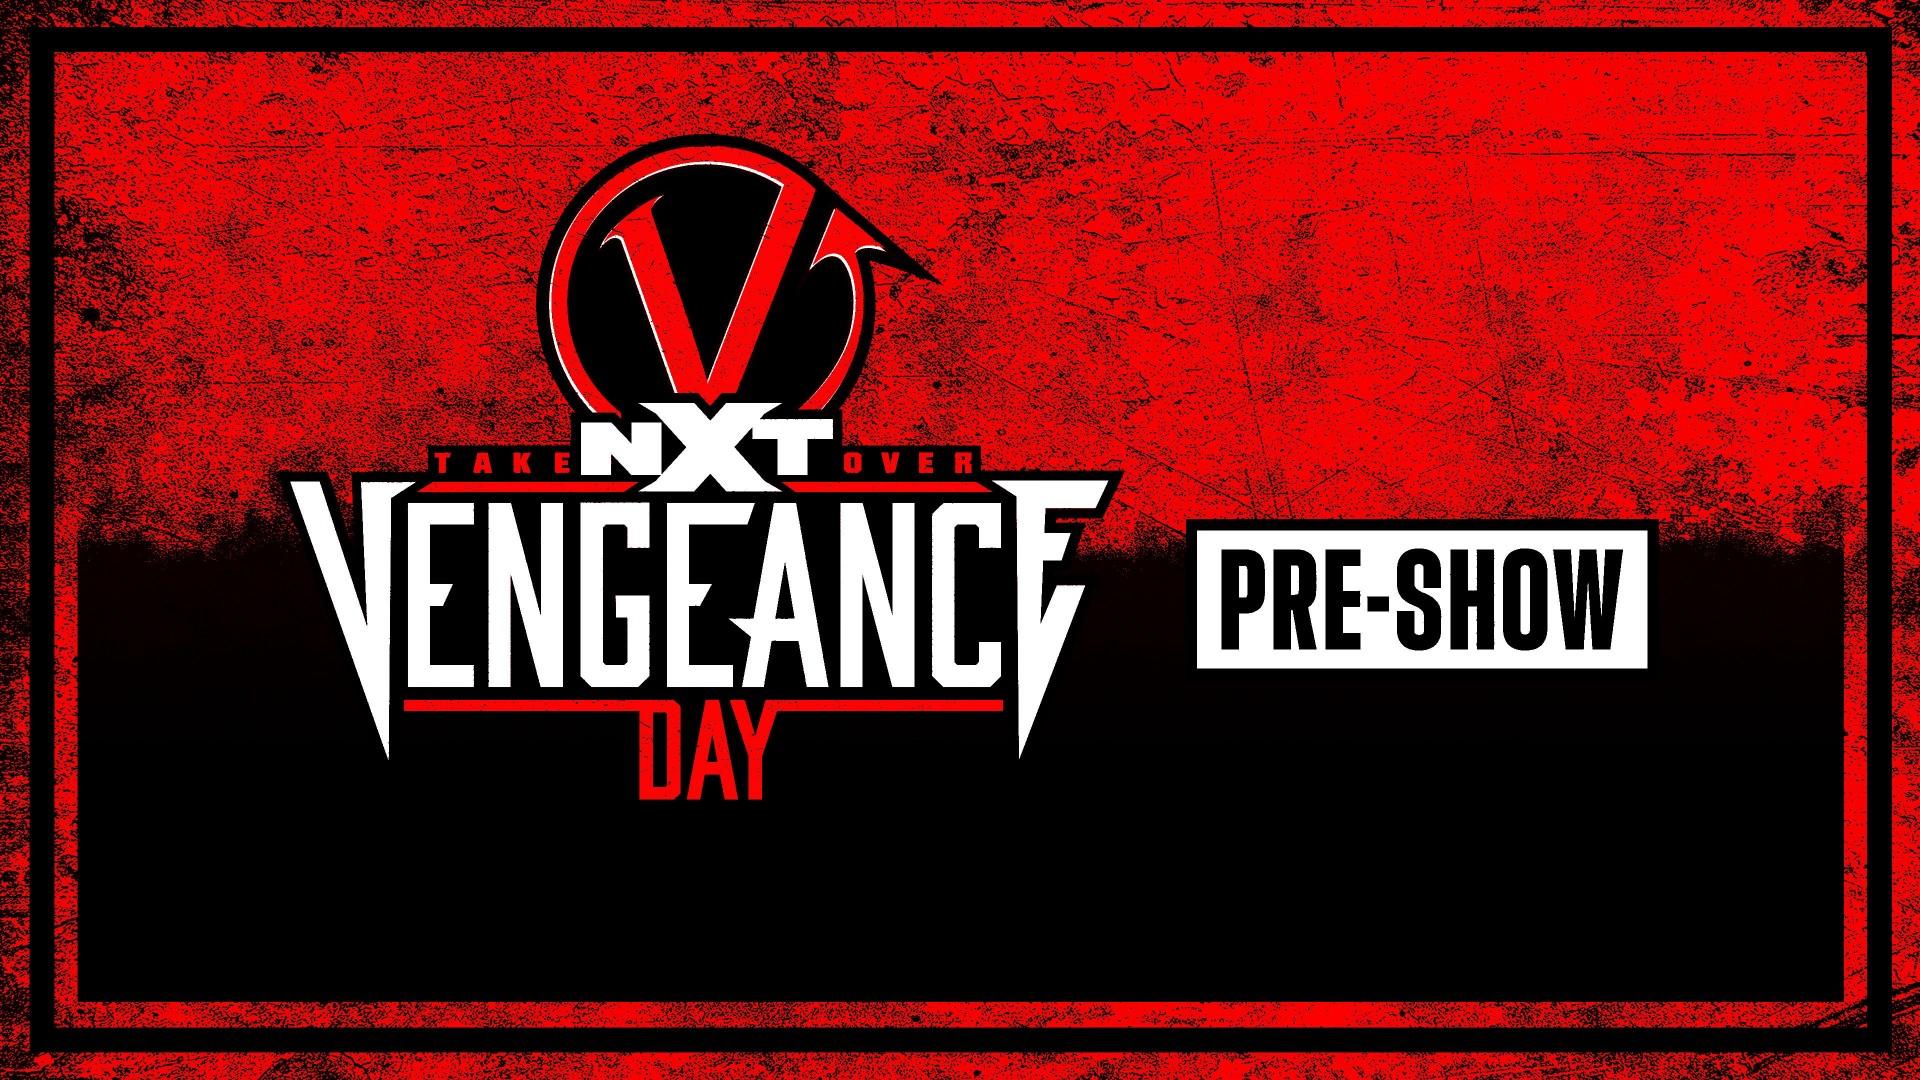 WWE NXT TakeOver: Vengeance Day 2021 Pre-Show